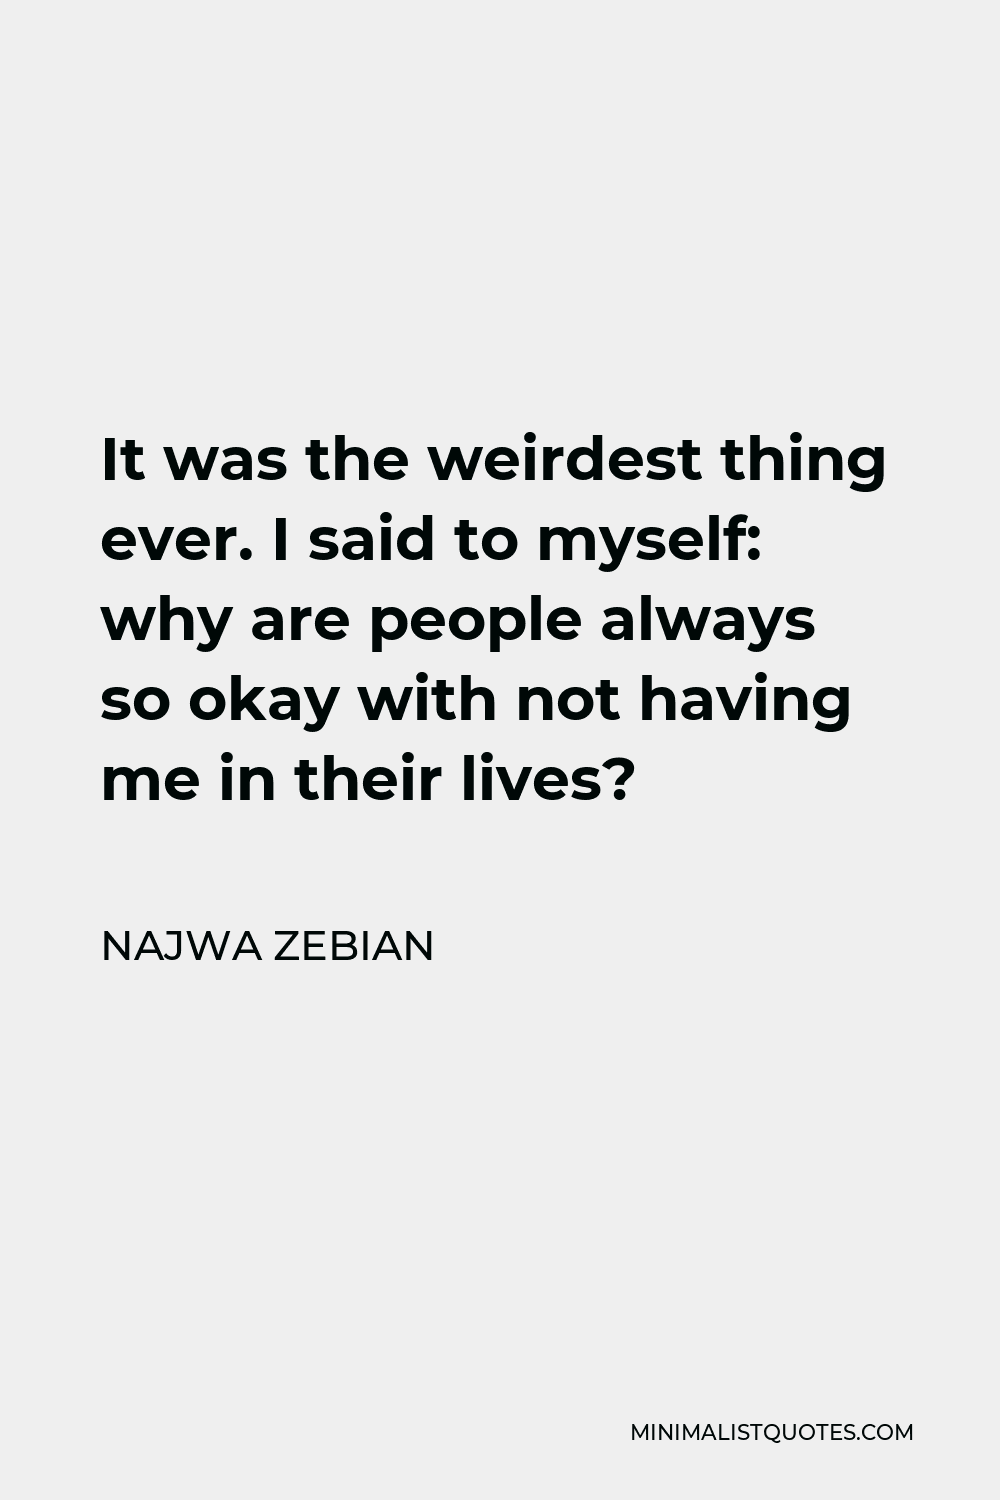 Najwa Zebian Quote - It was the weirdest thing ever. I said to myself: why are people always so okay with not having me in their lives?